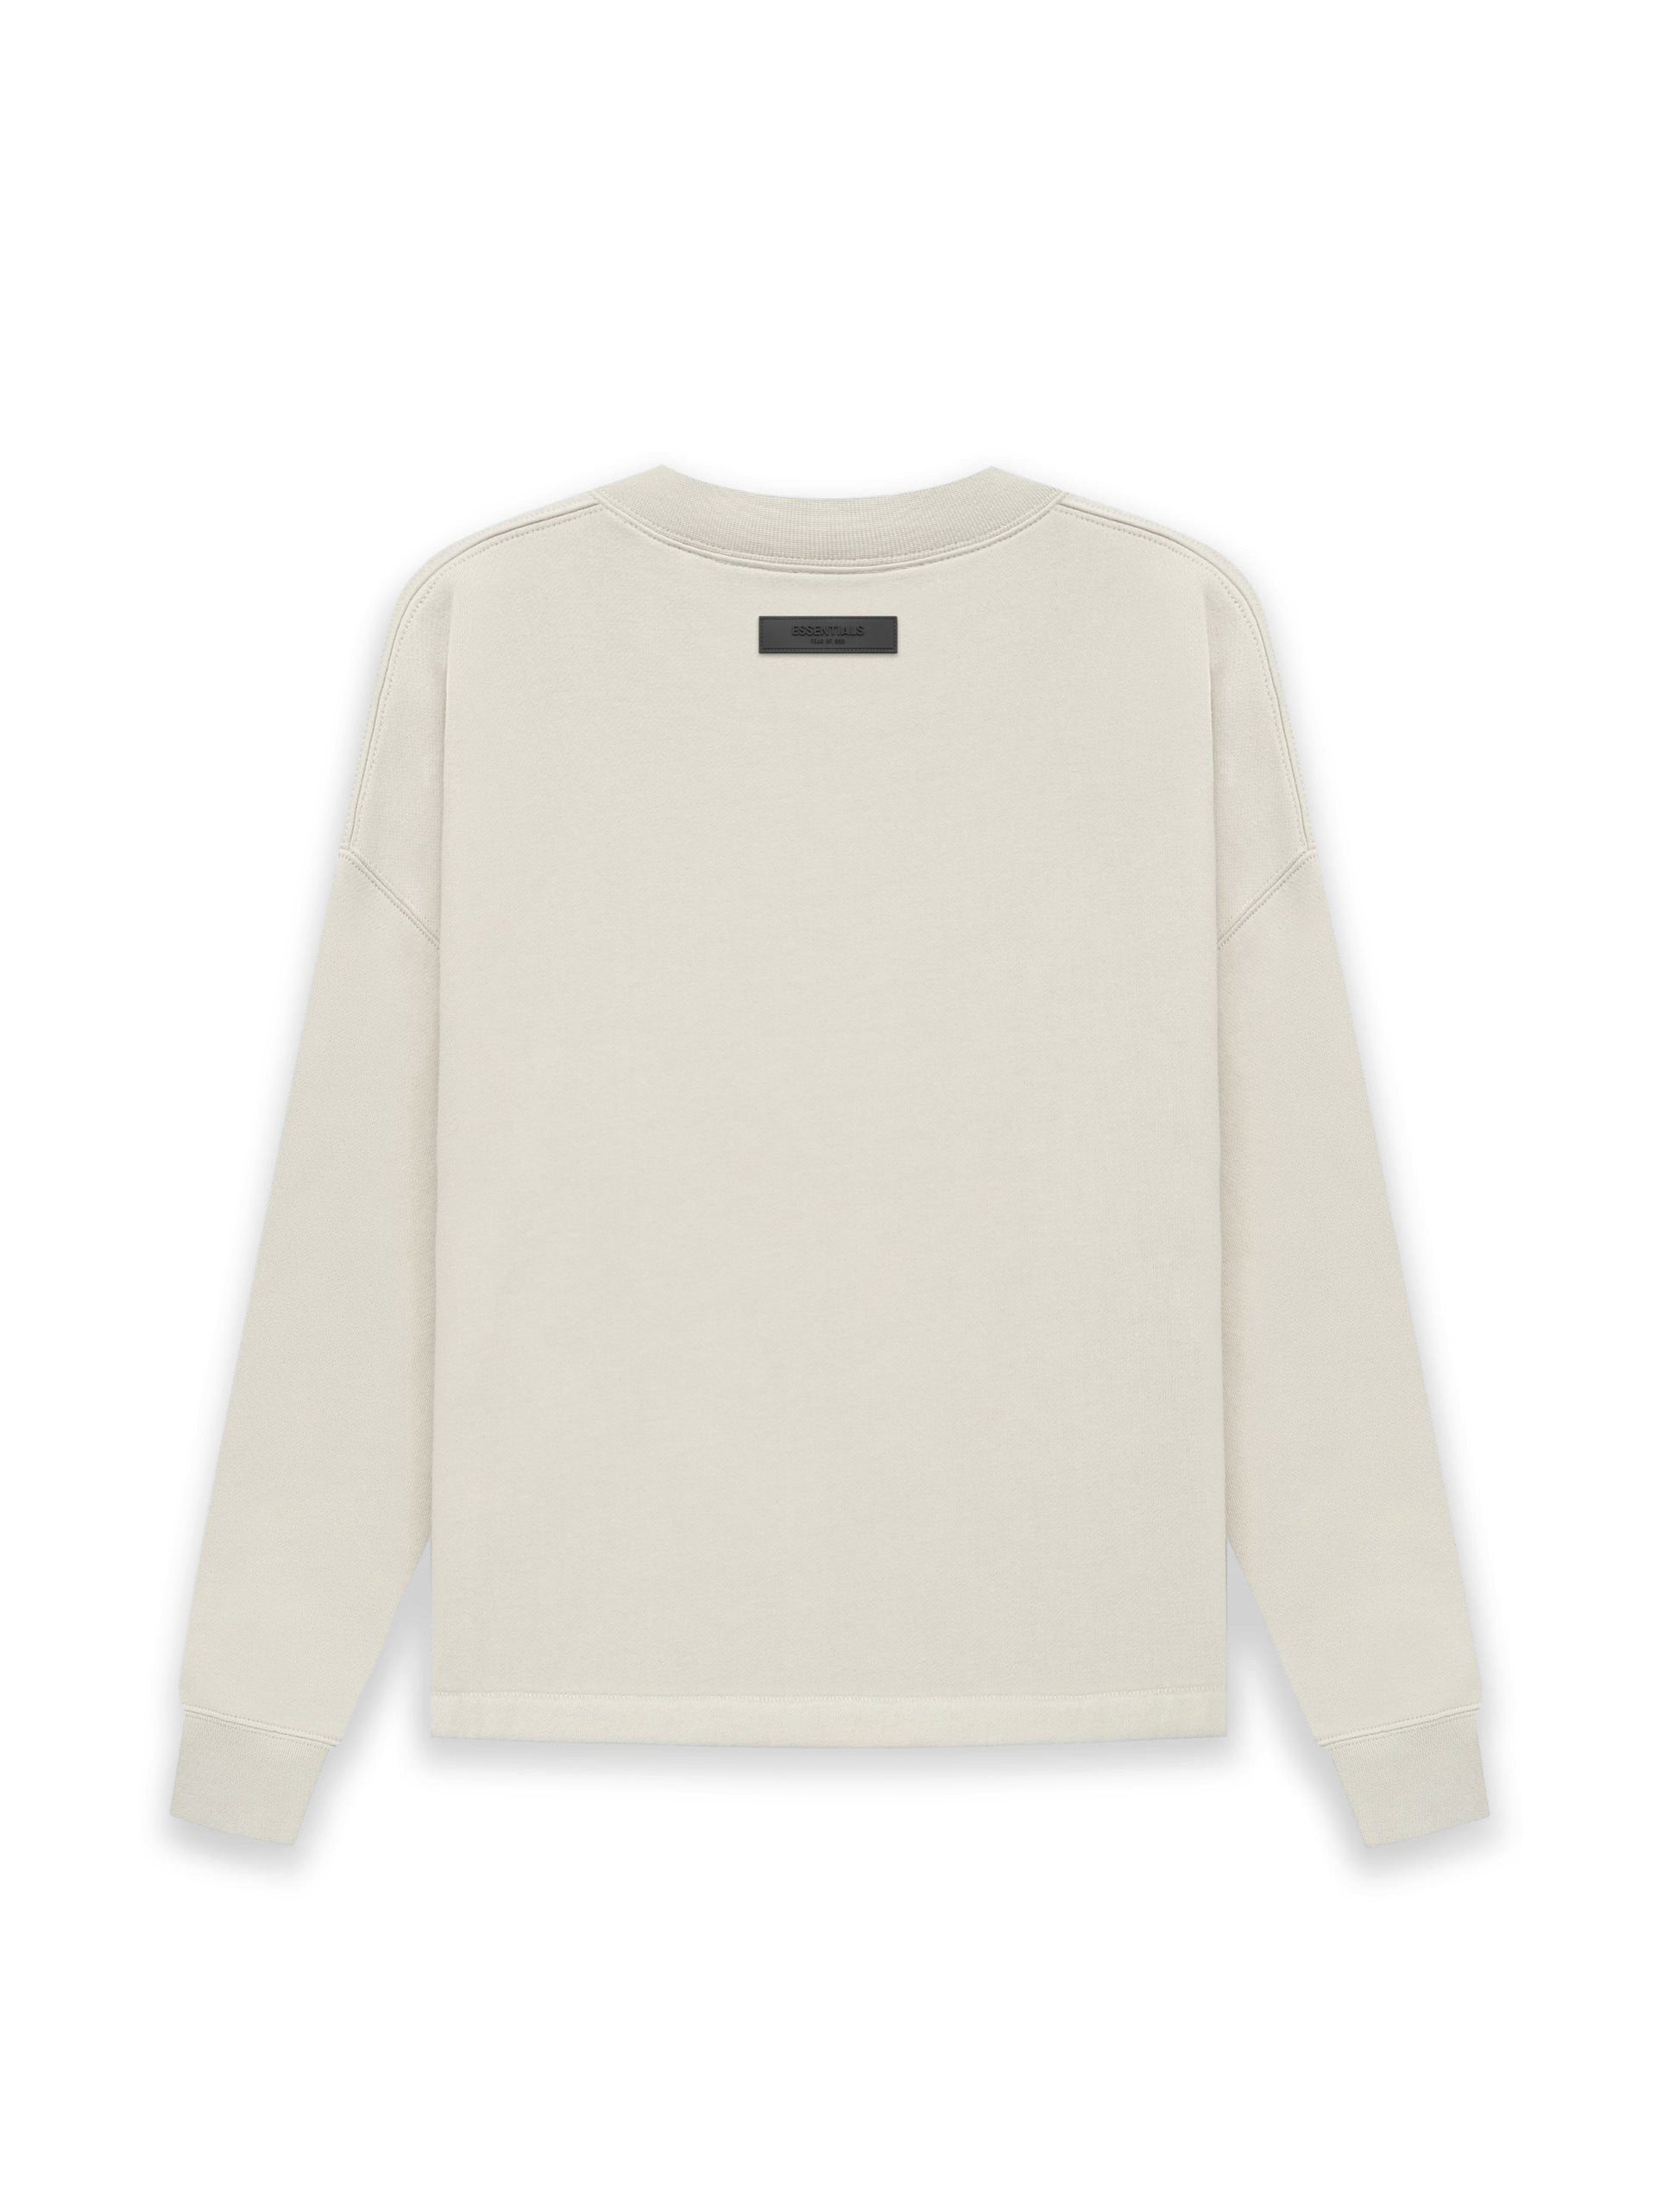 Fear of God Essentials Relaxed Crewneck Wheat Men's - SS22 - GB